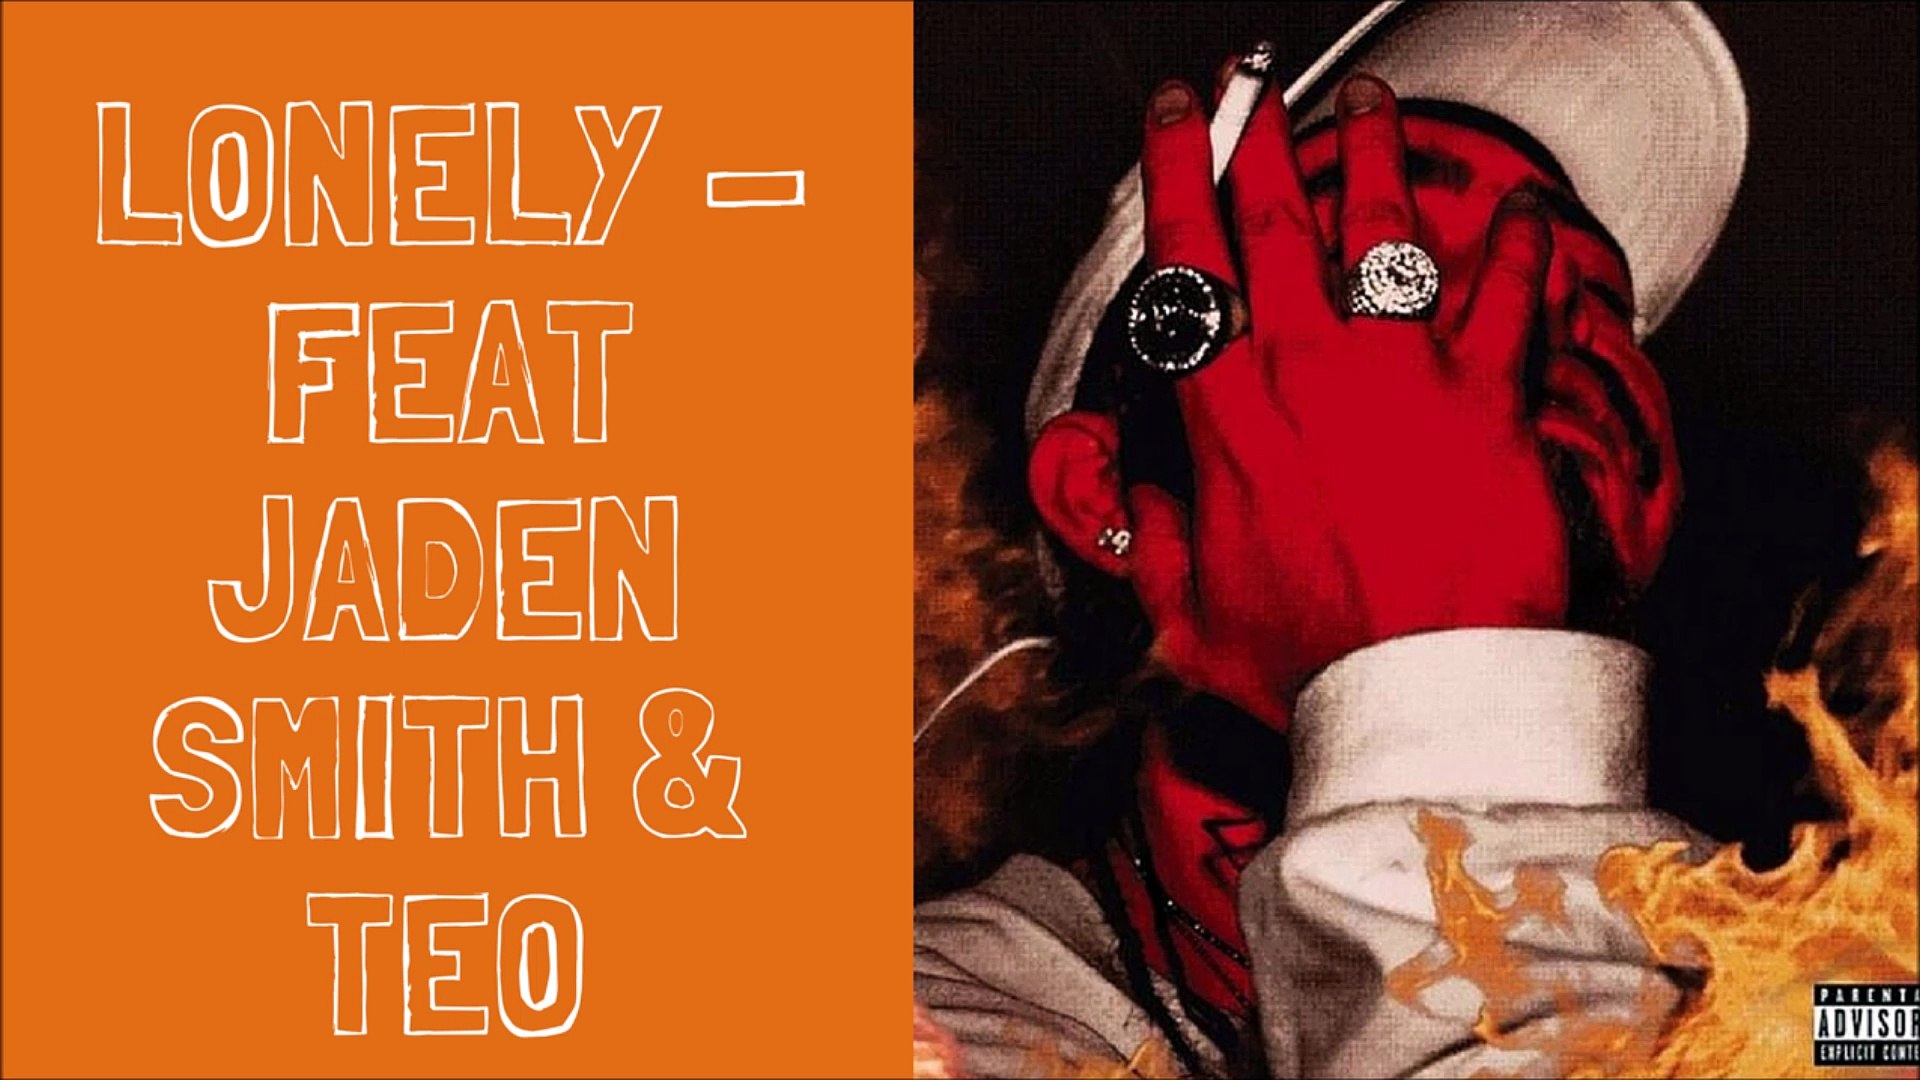 ⁣Post Malone - Lonely (feat Jaden Smith & Teo)